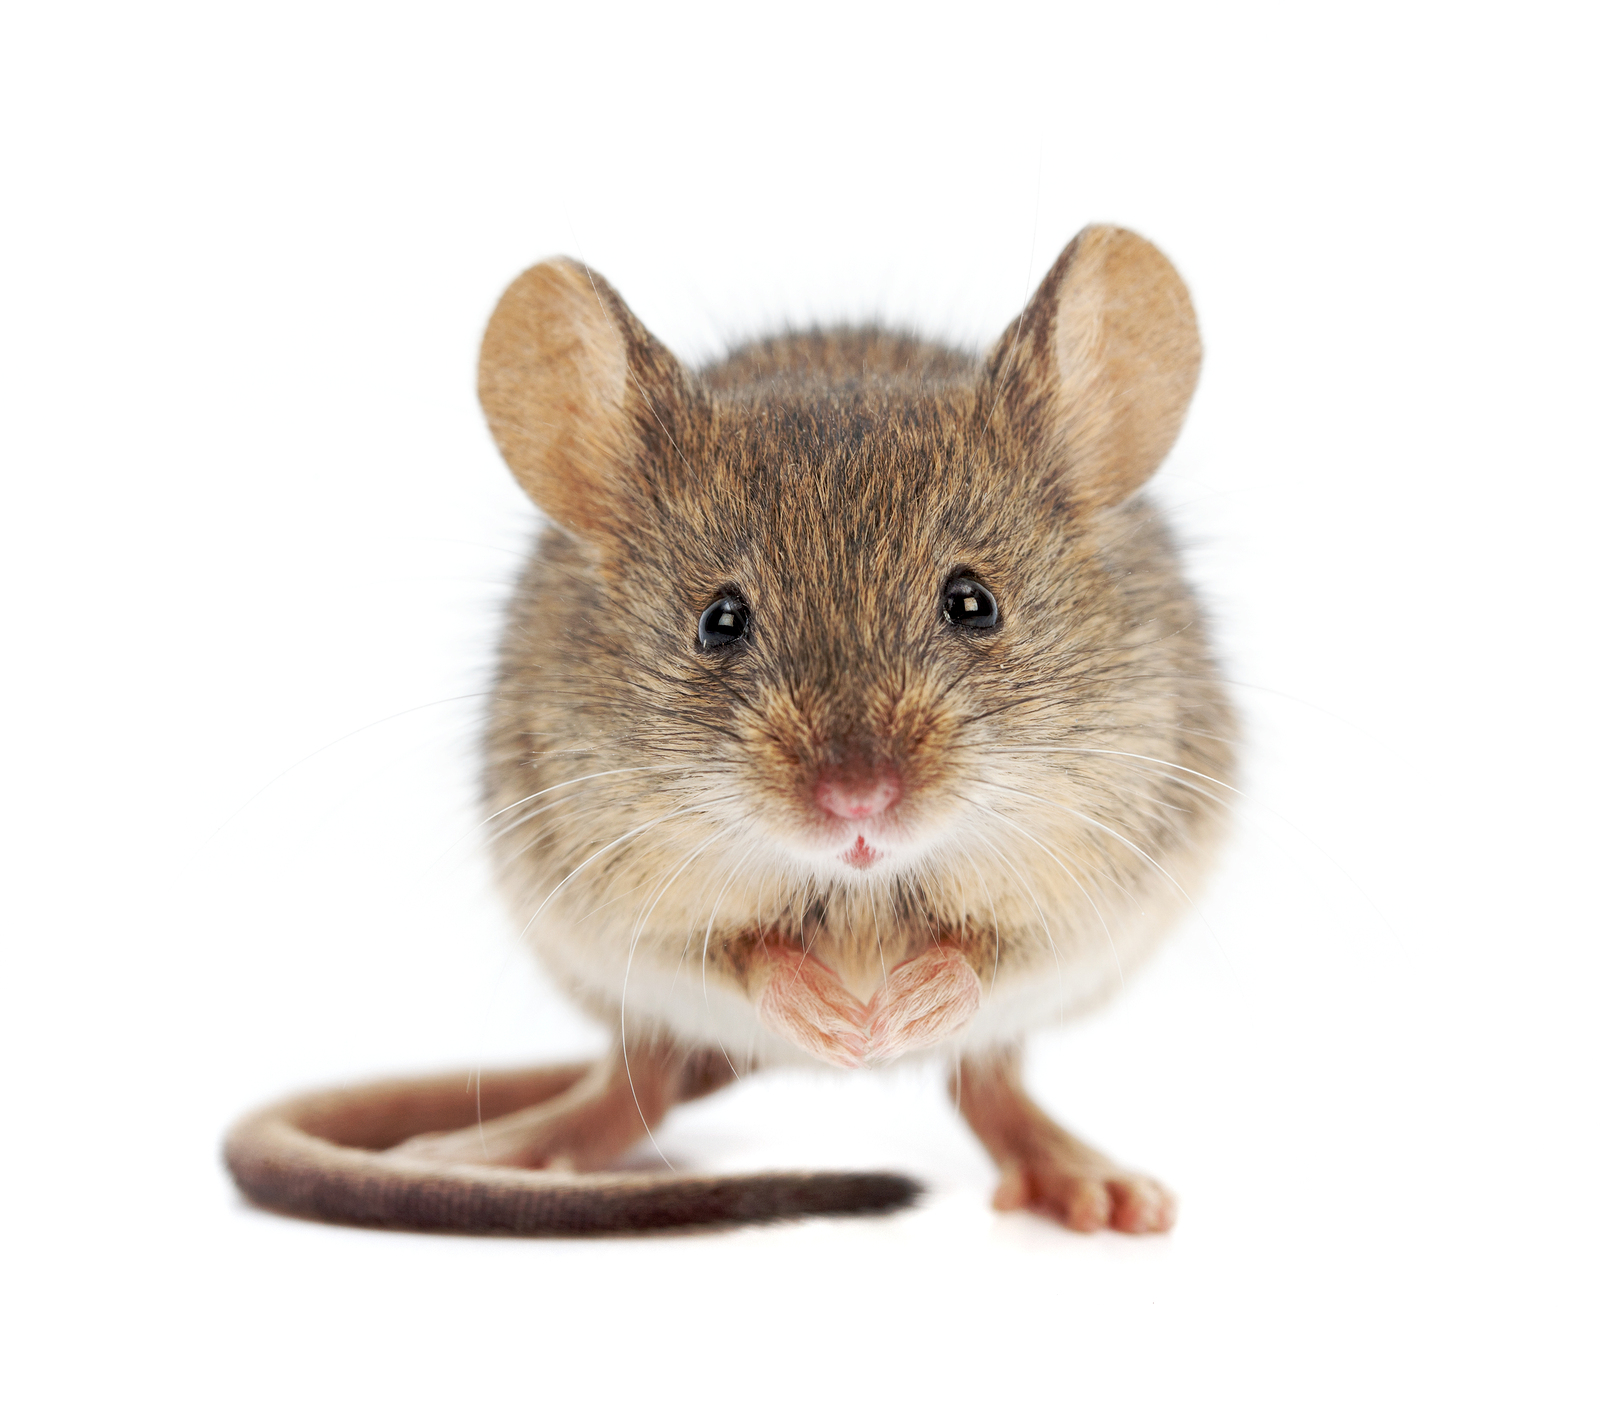 bigstock-House-Mouse-Standing-mus-Musc-45427162